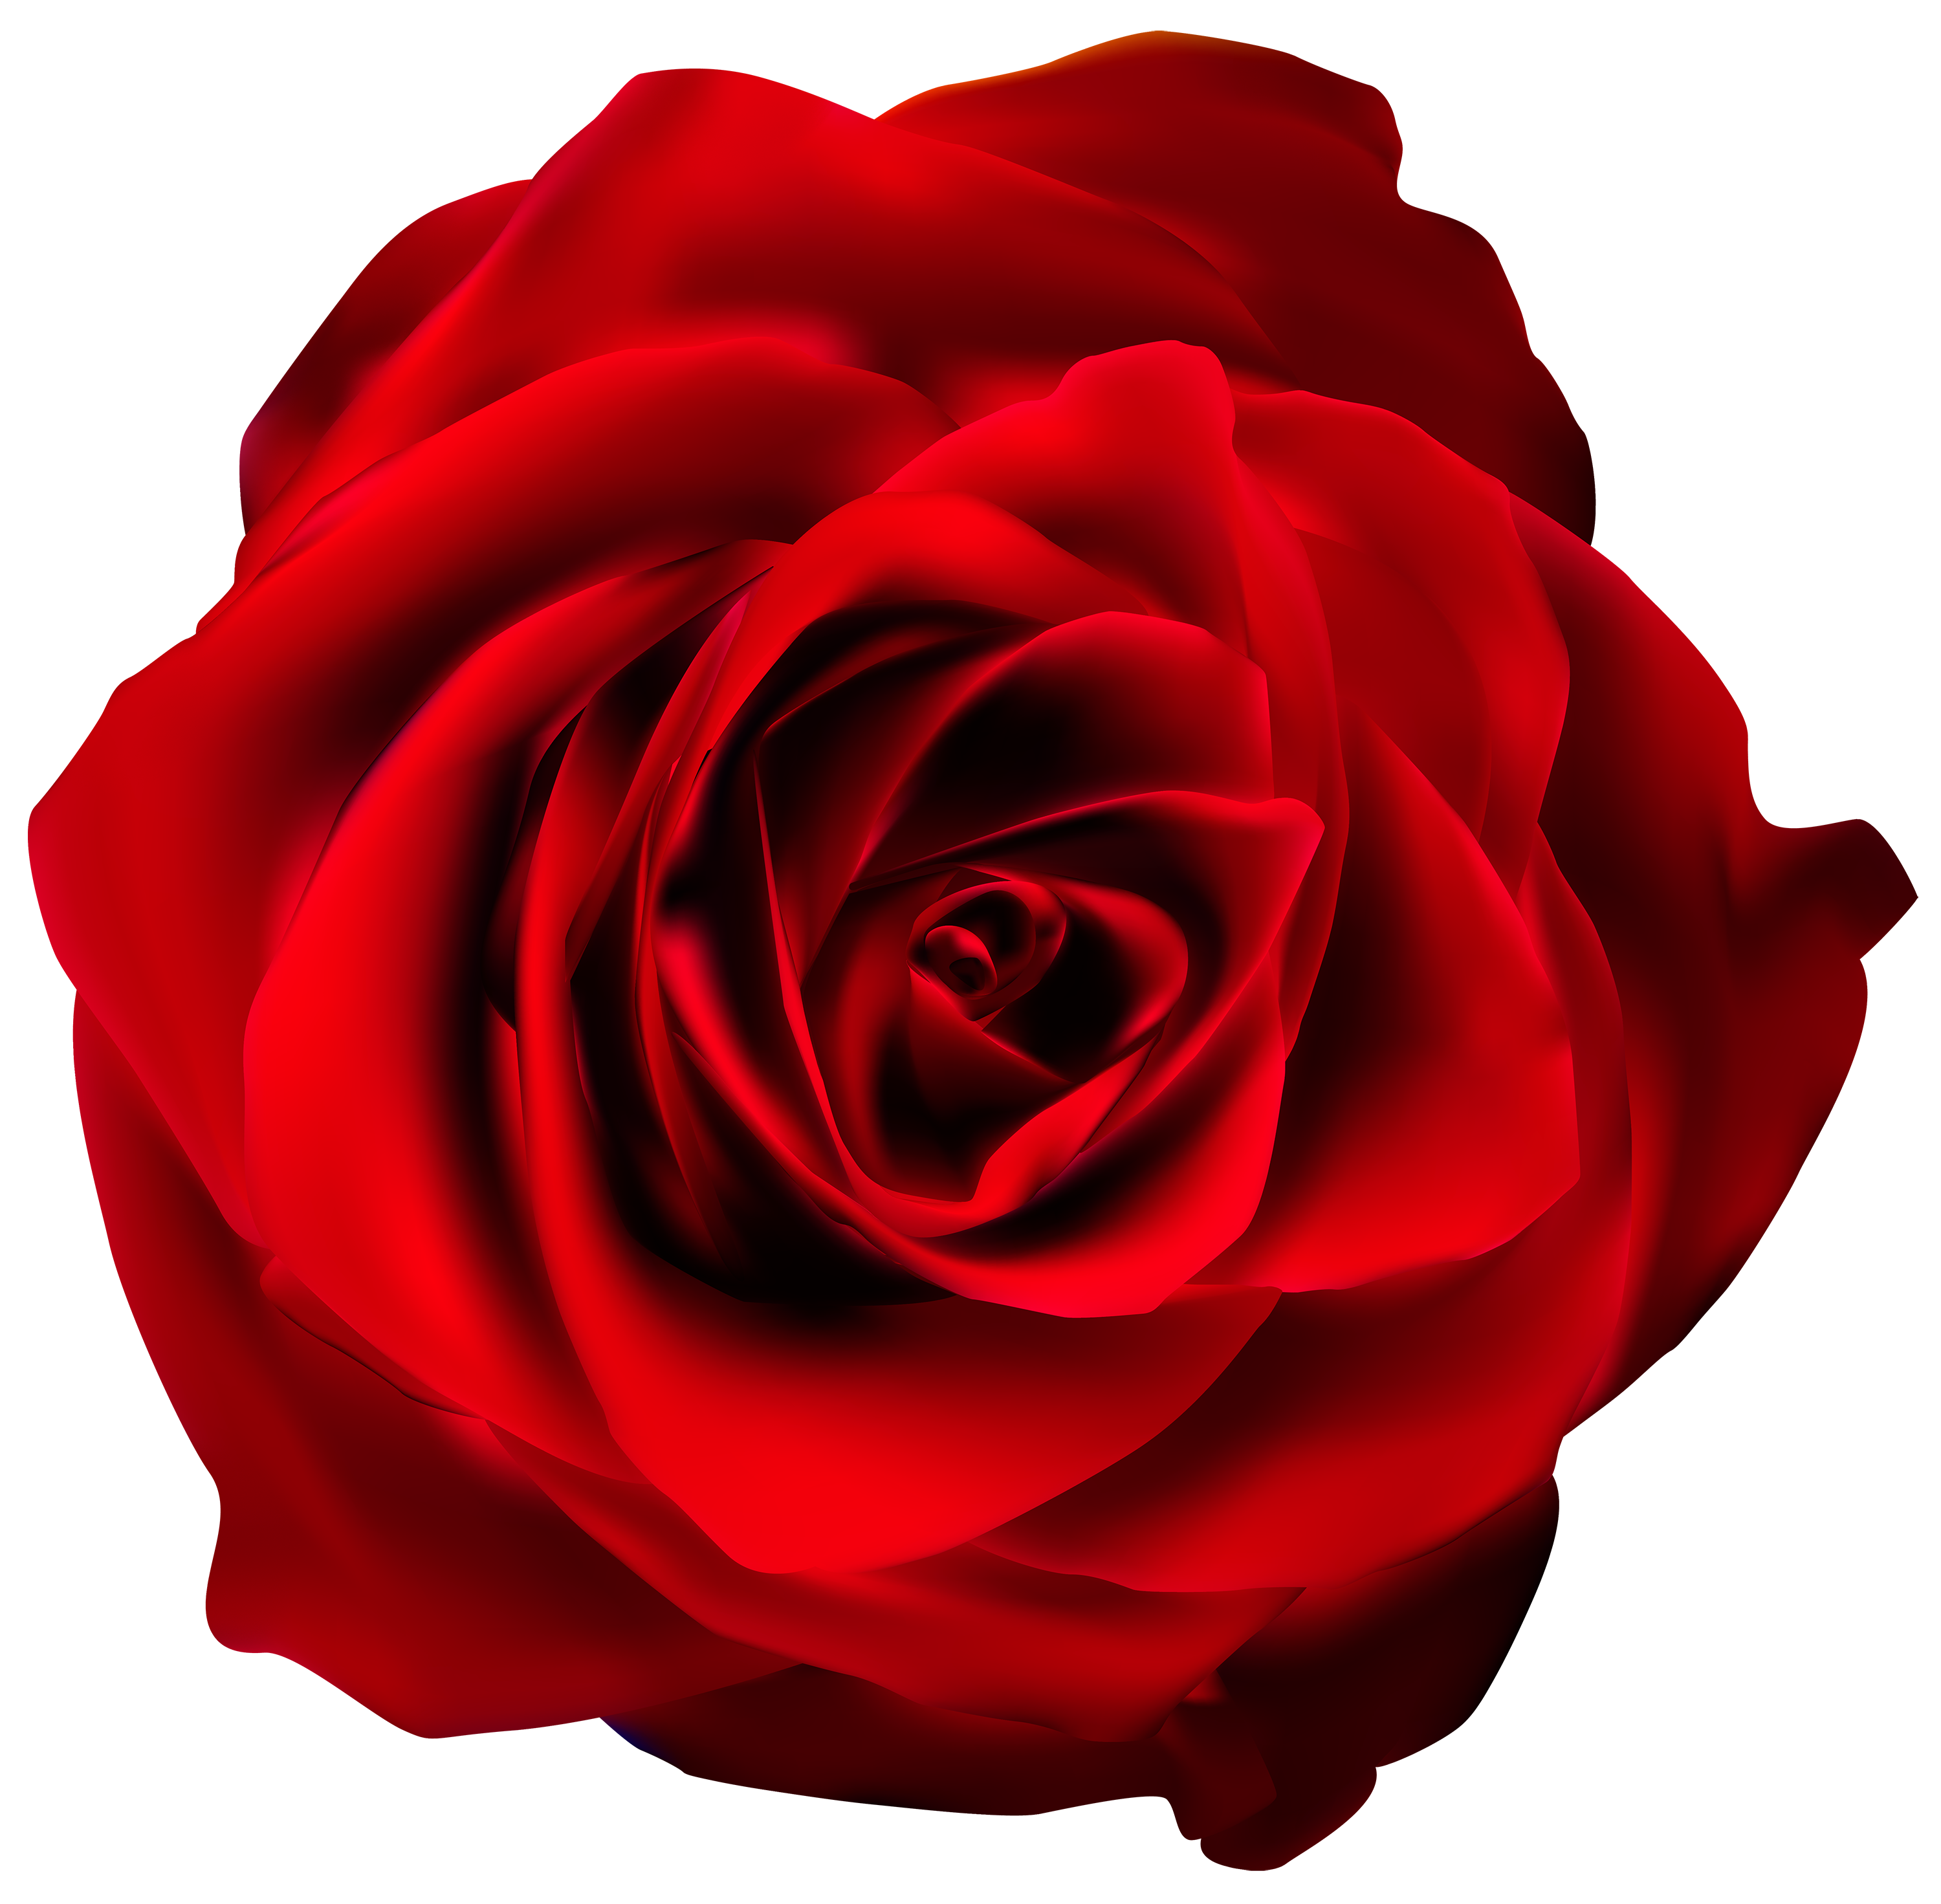 Red Rose Transparent PNG Clip Art Image | Gallery Yopriceville - High ...